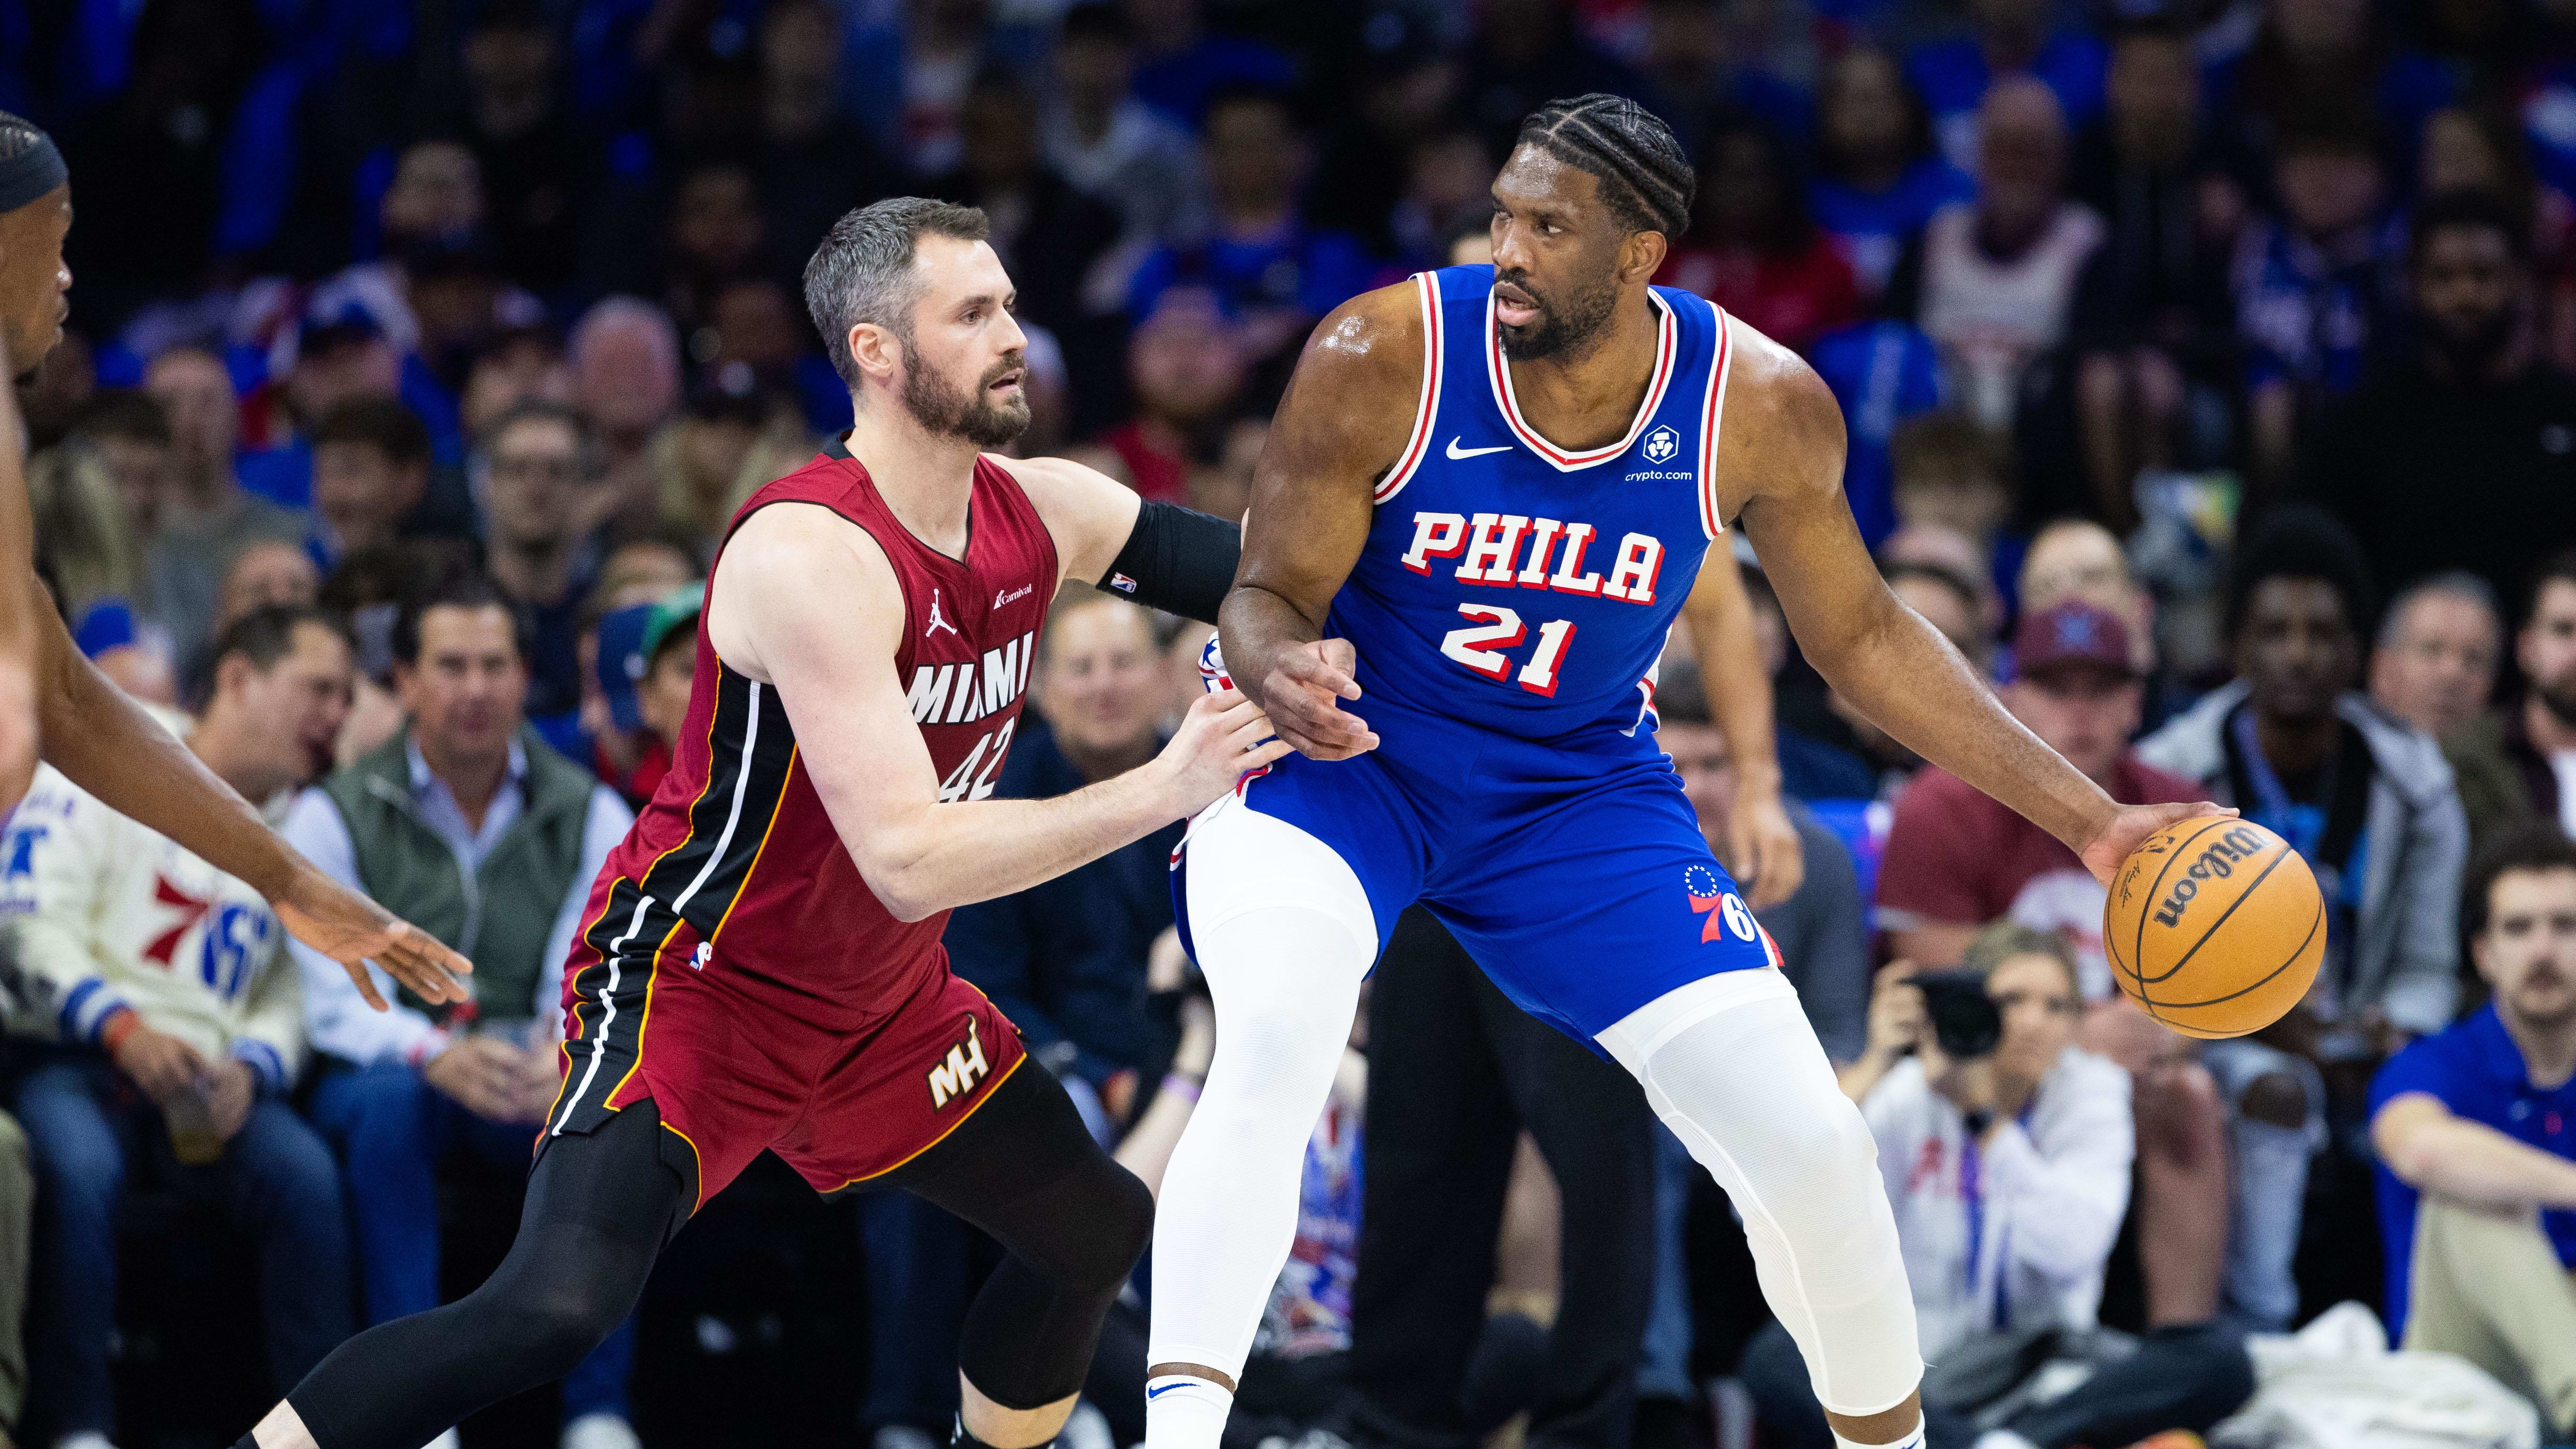 Philadelphia 76ers’ Joel Embiid Provides Positive Knee Injury Update After Play-In Victory